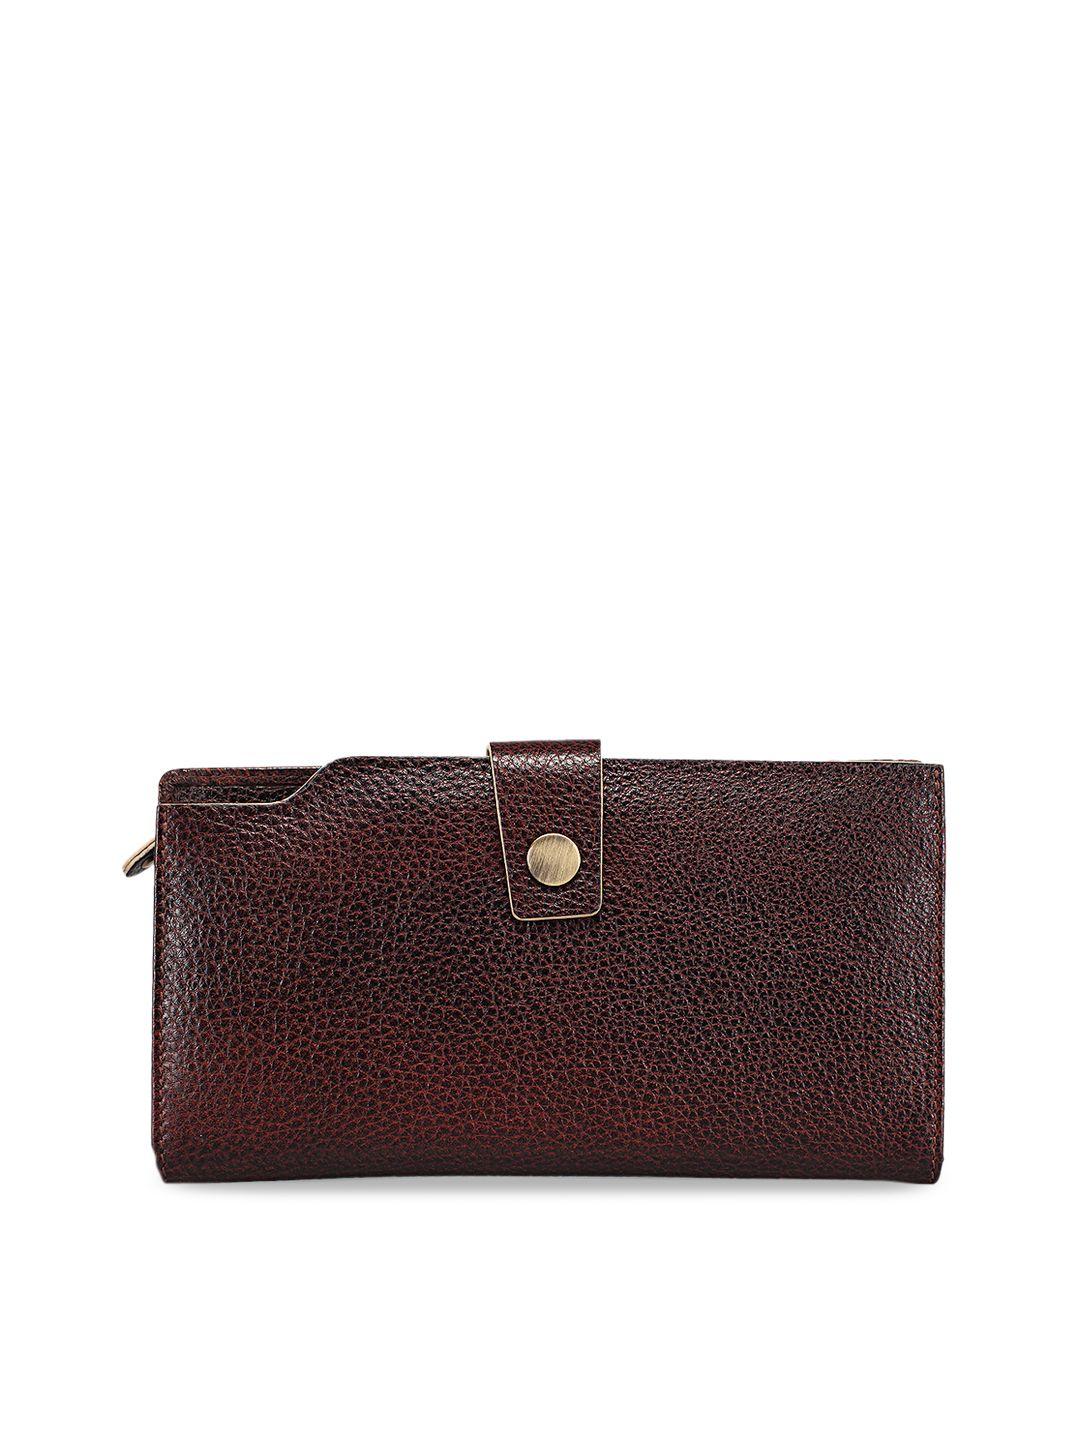 genwayne brown solid leather purse clutch